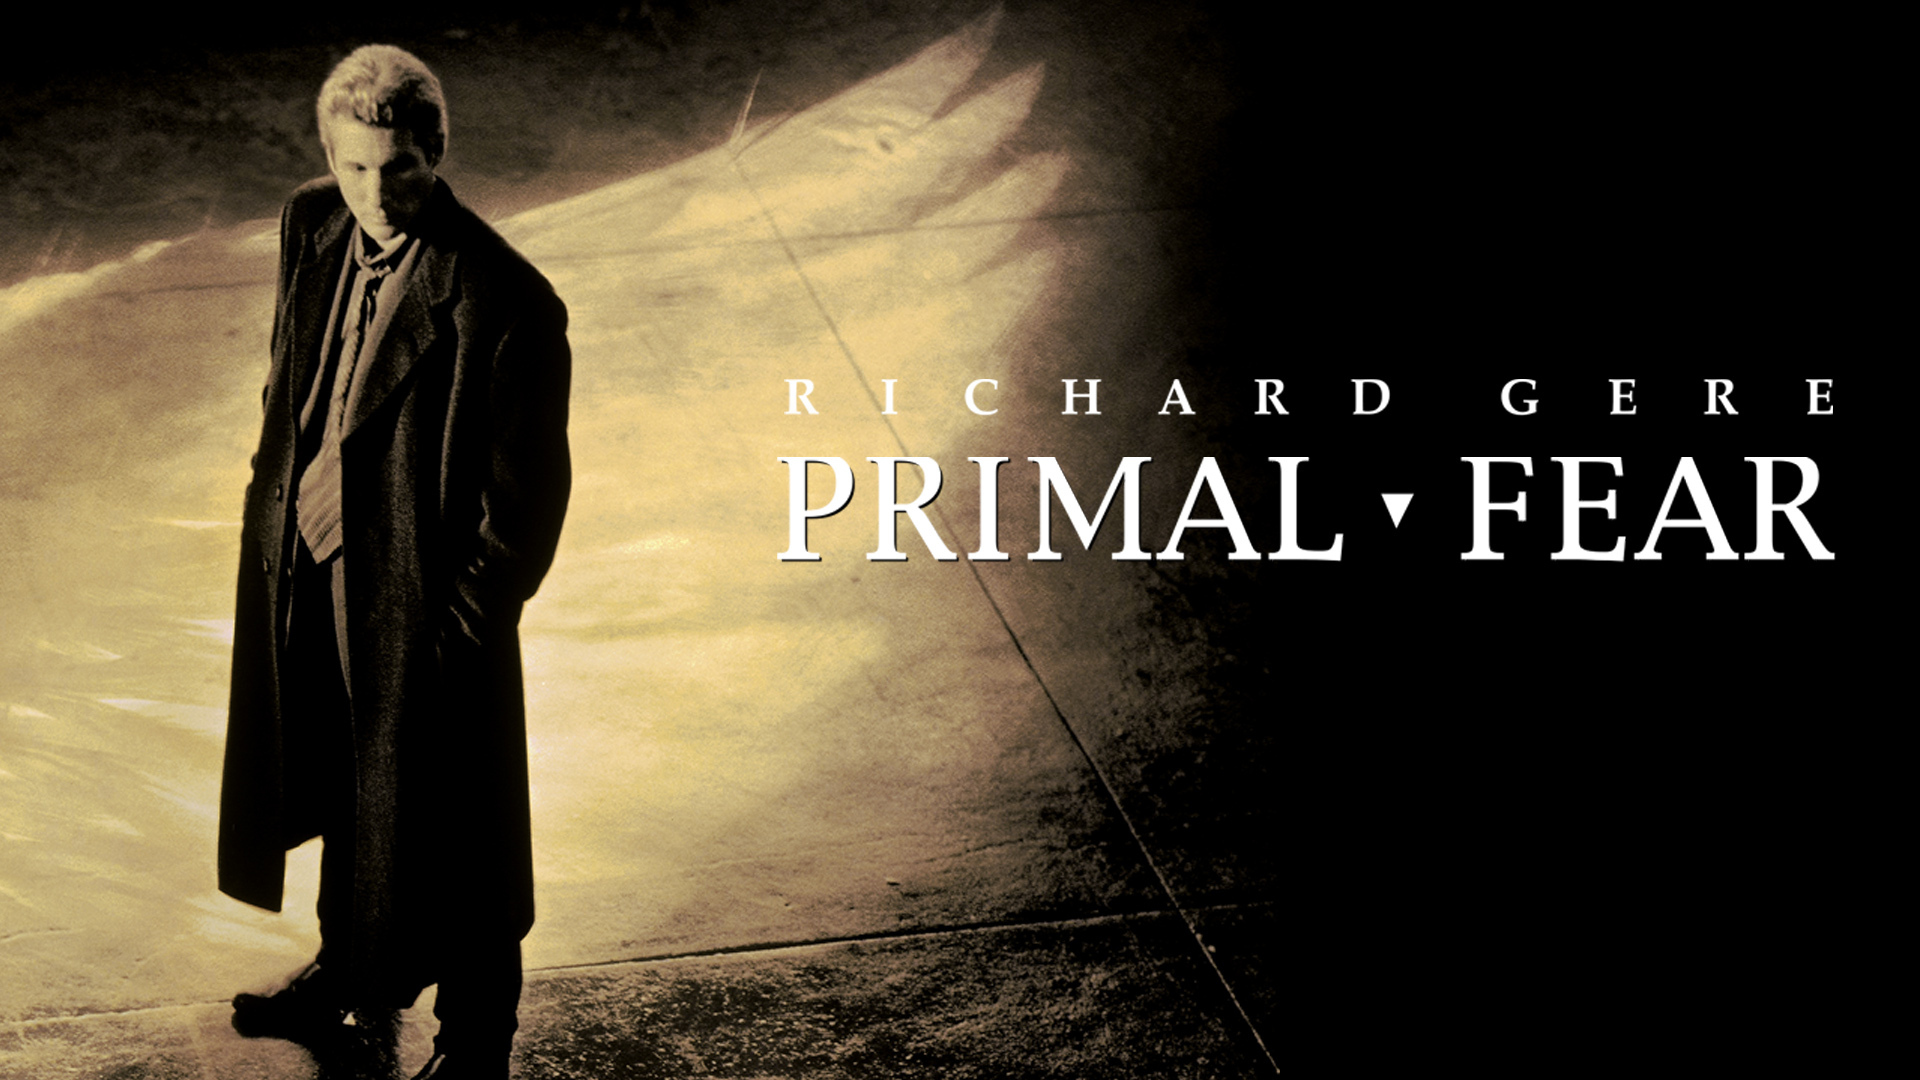 primal fear movie poster